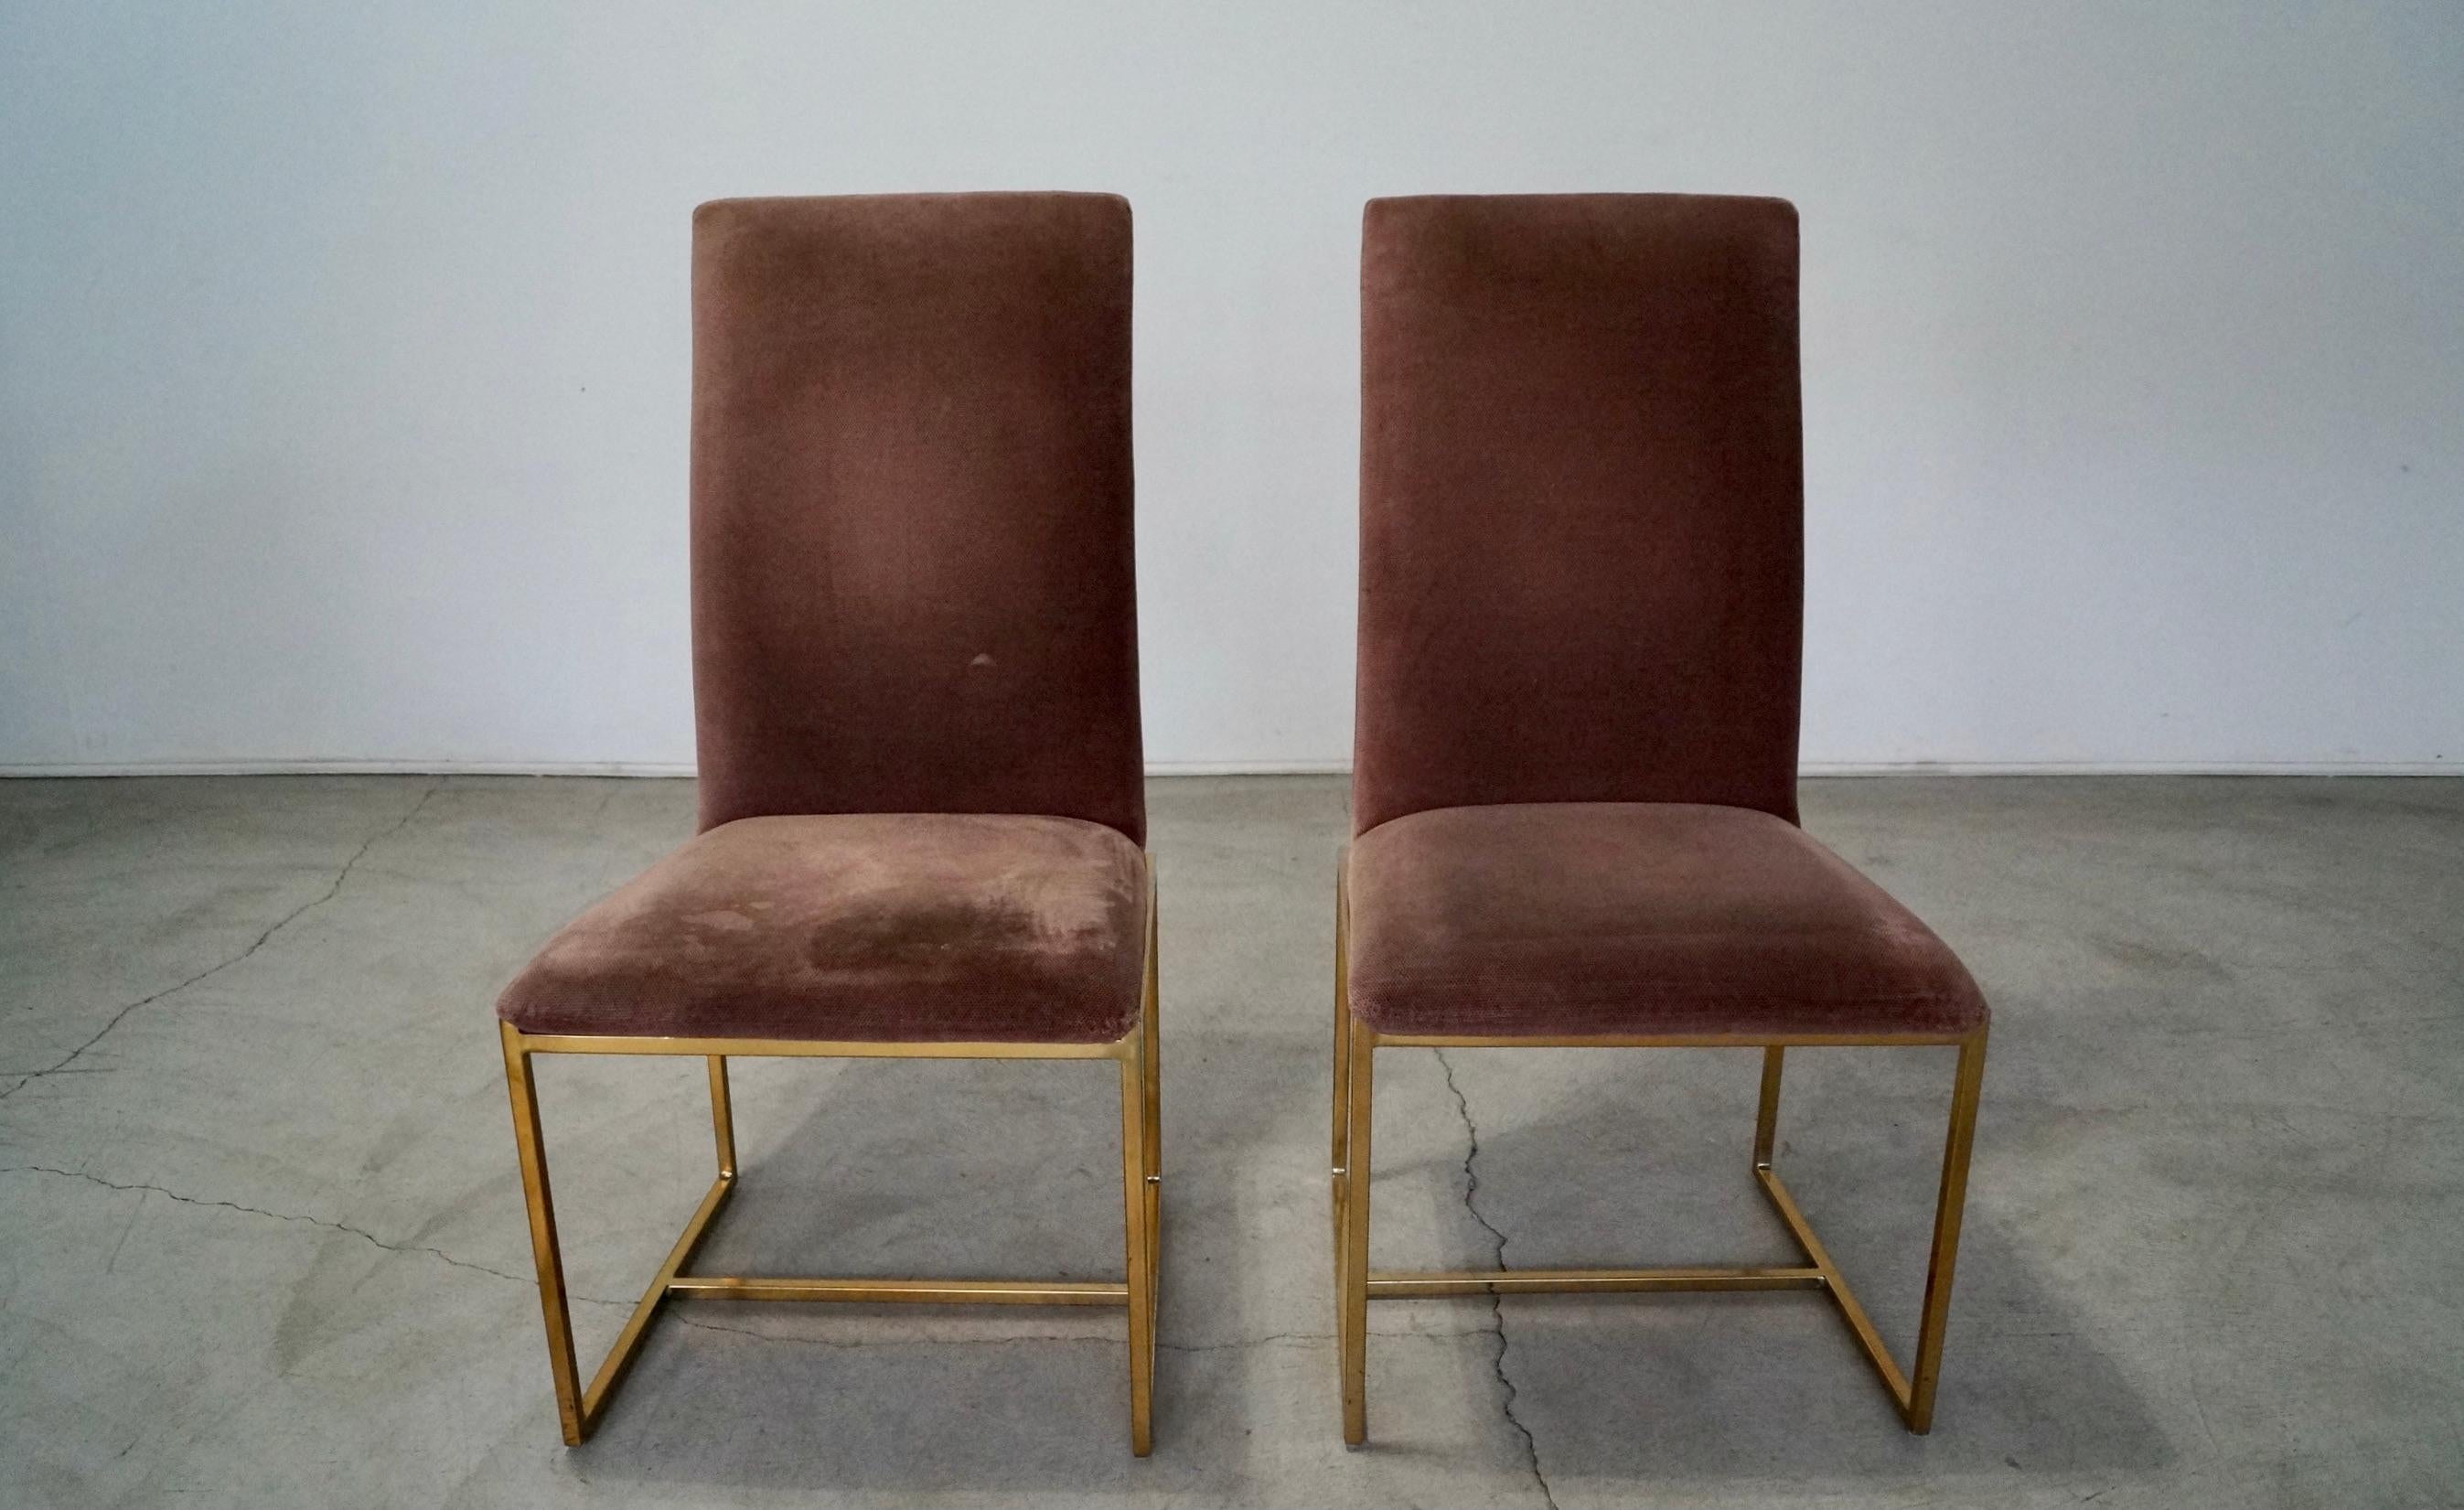 Hollywood Regency 1970's Mid-Century Modern Milo Baughman Style Brass Dining Chairs - a Pair For Sale